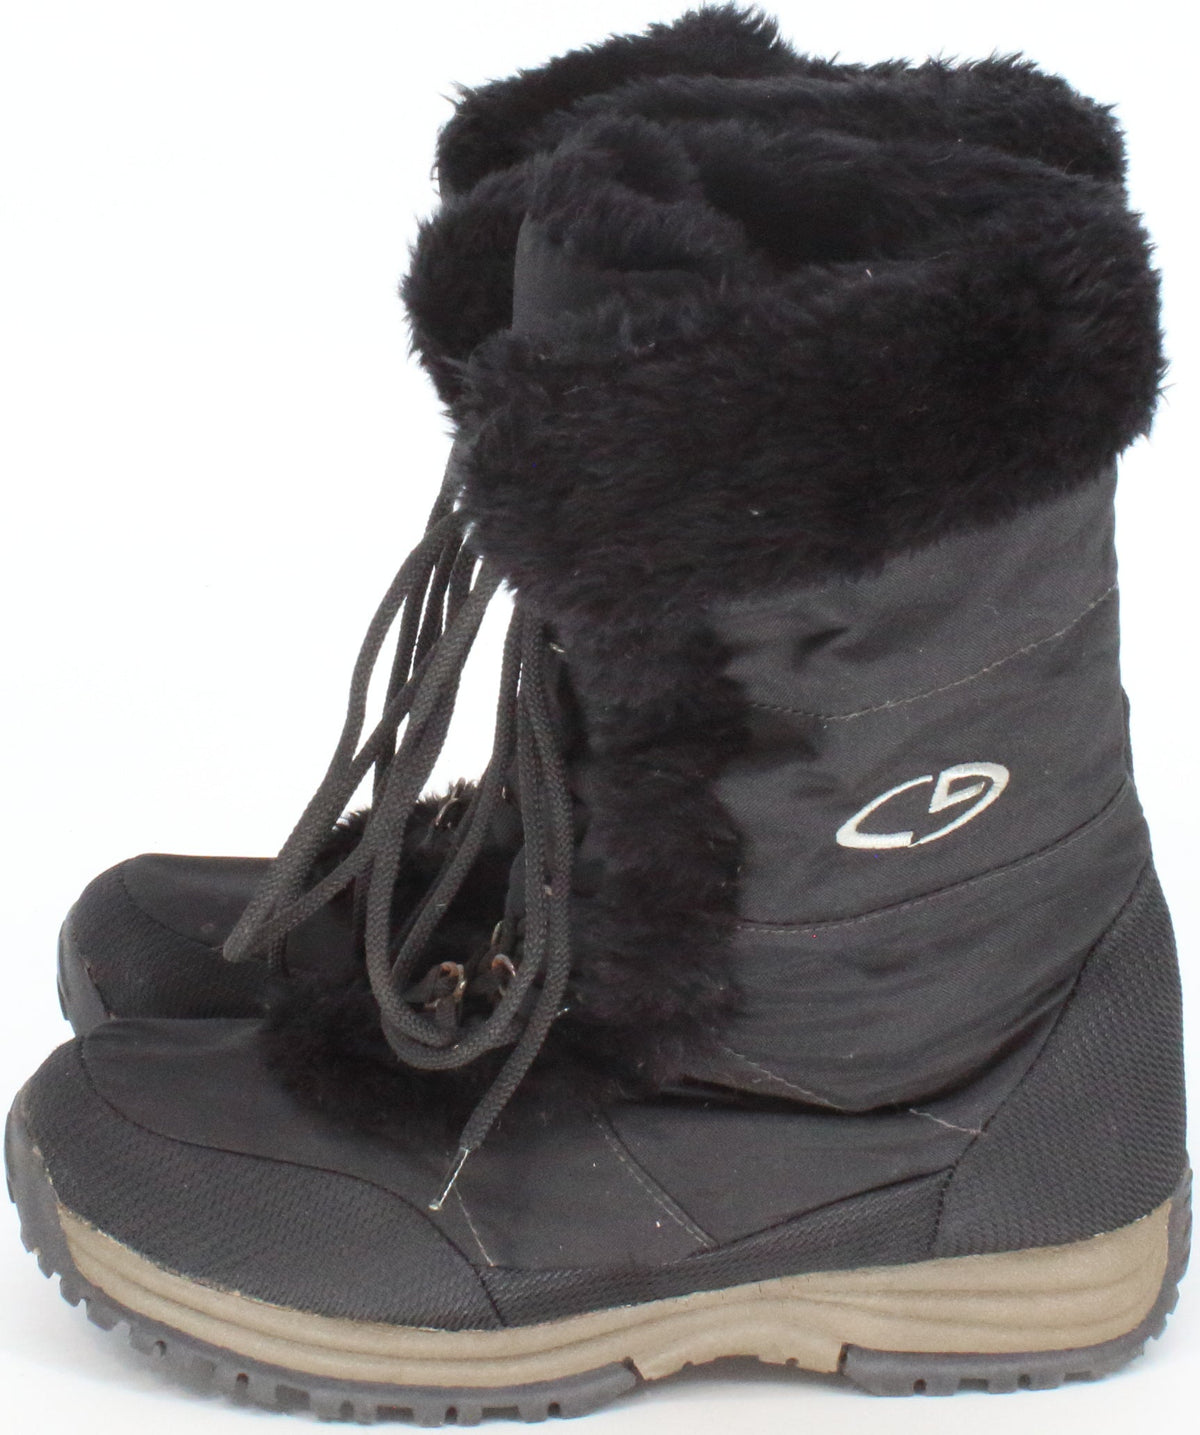 C9 Black Lace Up Winter Boots